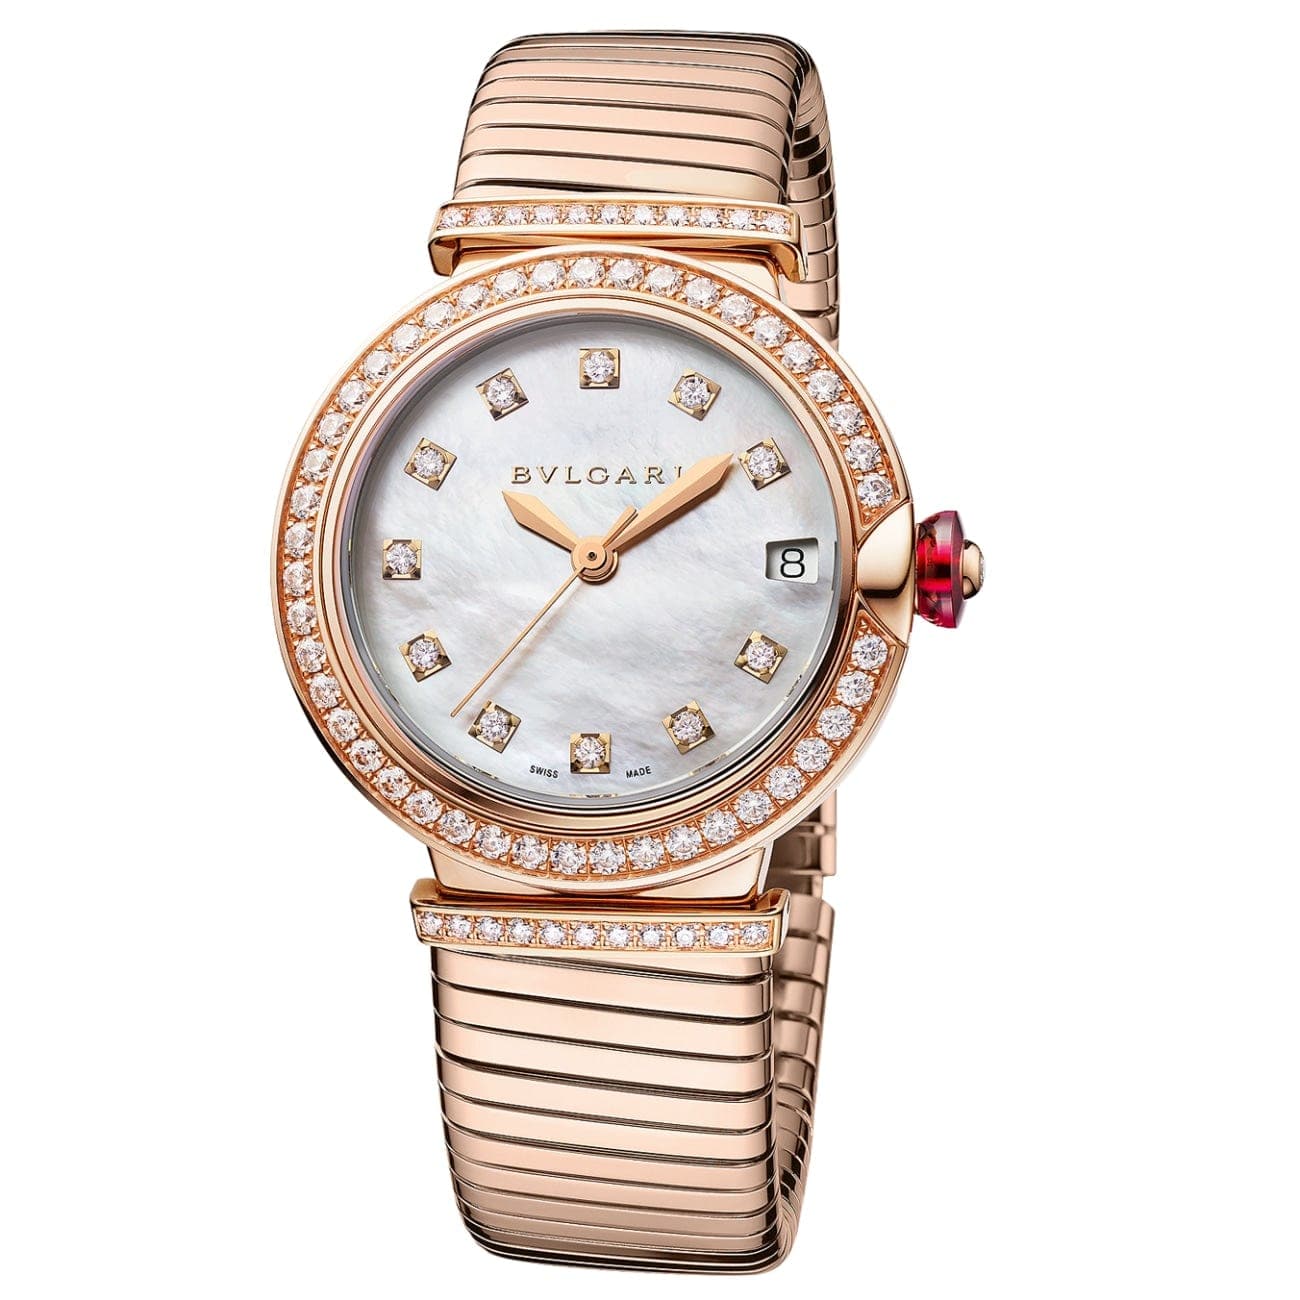 Lv ladies watch  Cool watches, Womens watches, Lady